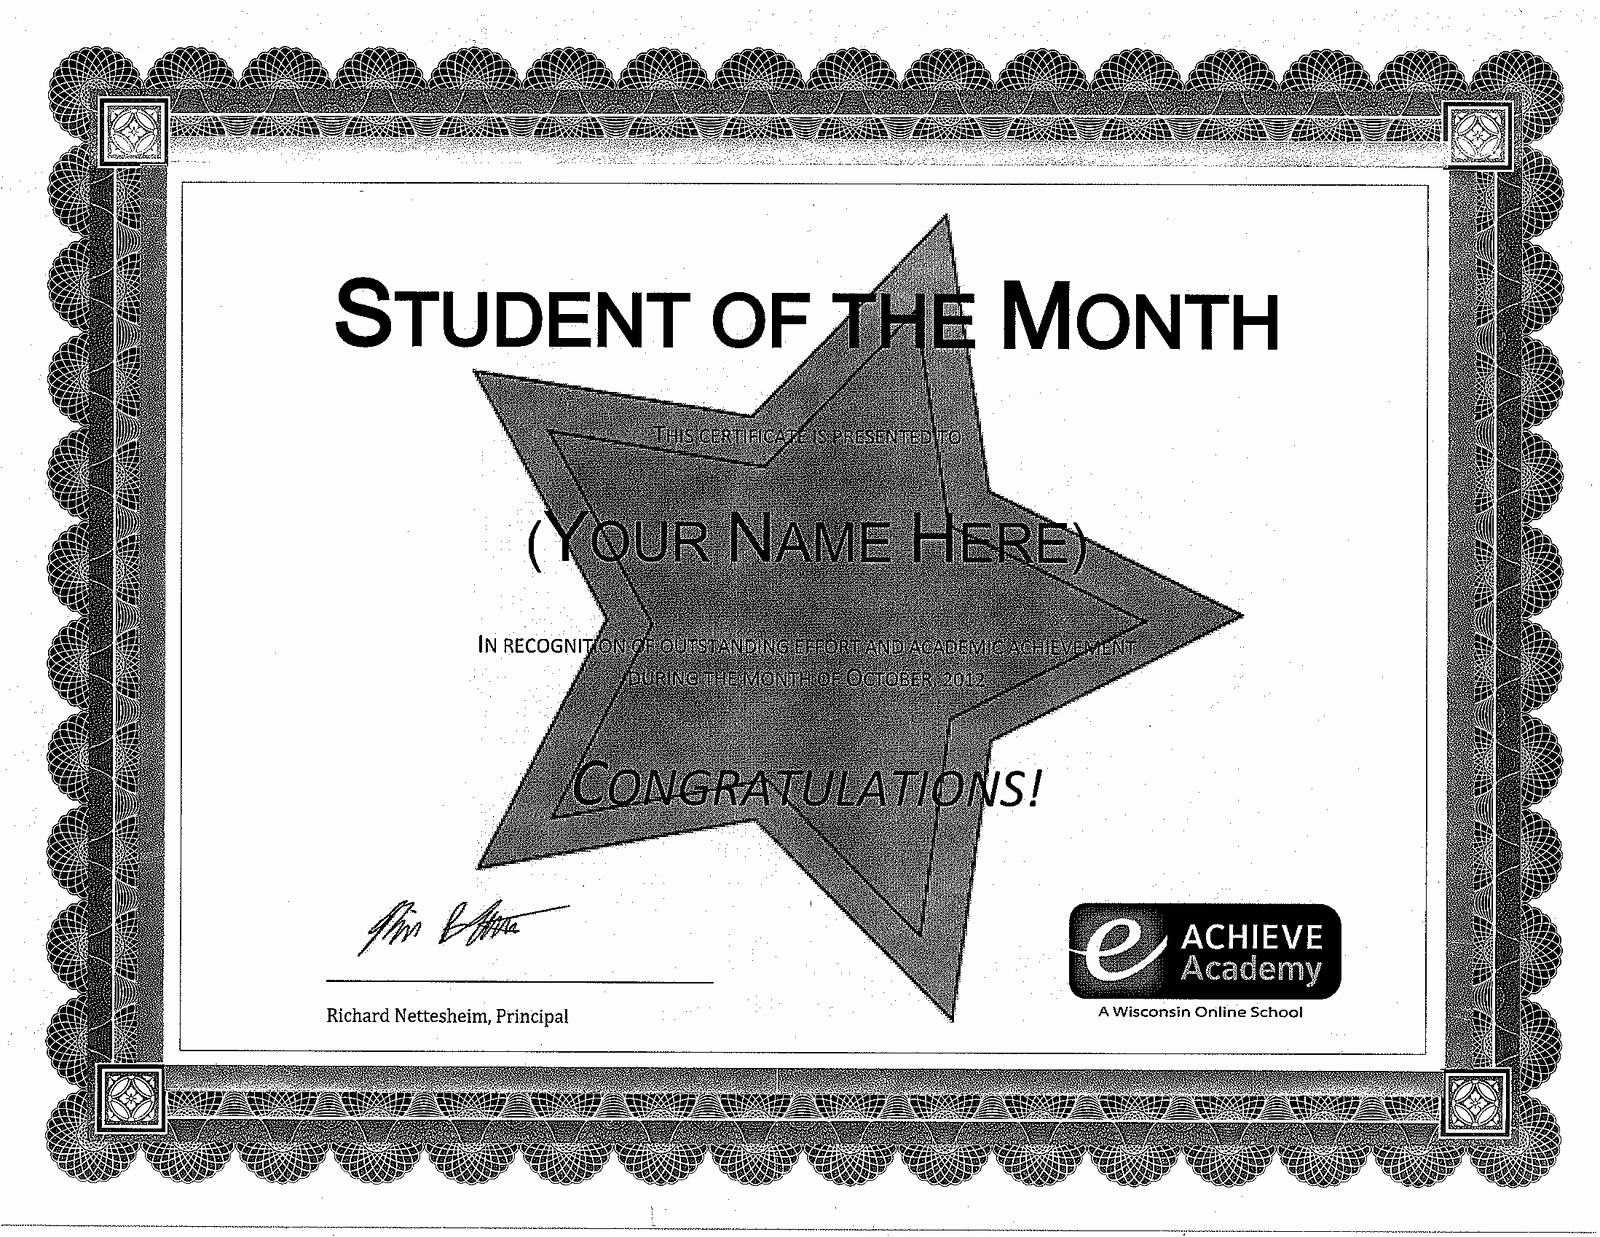 Student Of the Month Certificate Best Of Learning for Your Lifestyle Students Of the Month